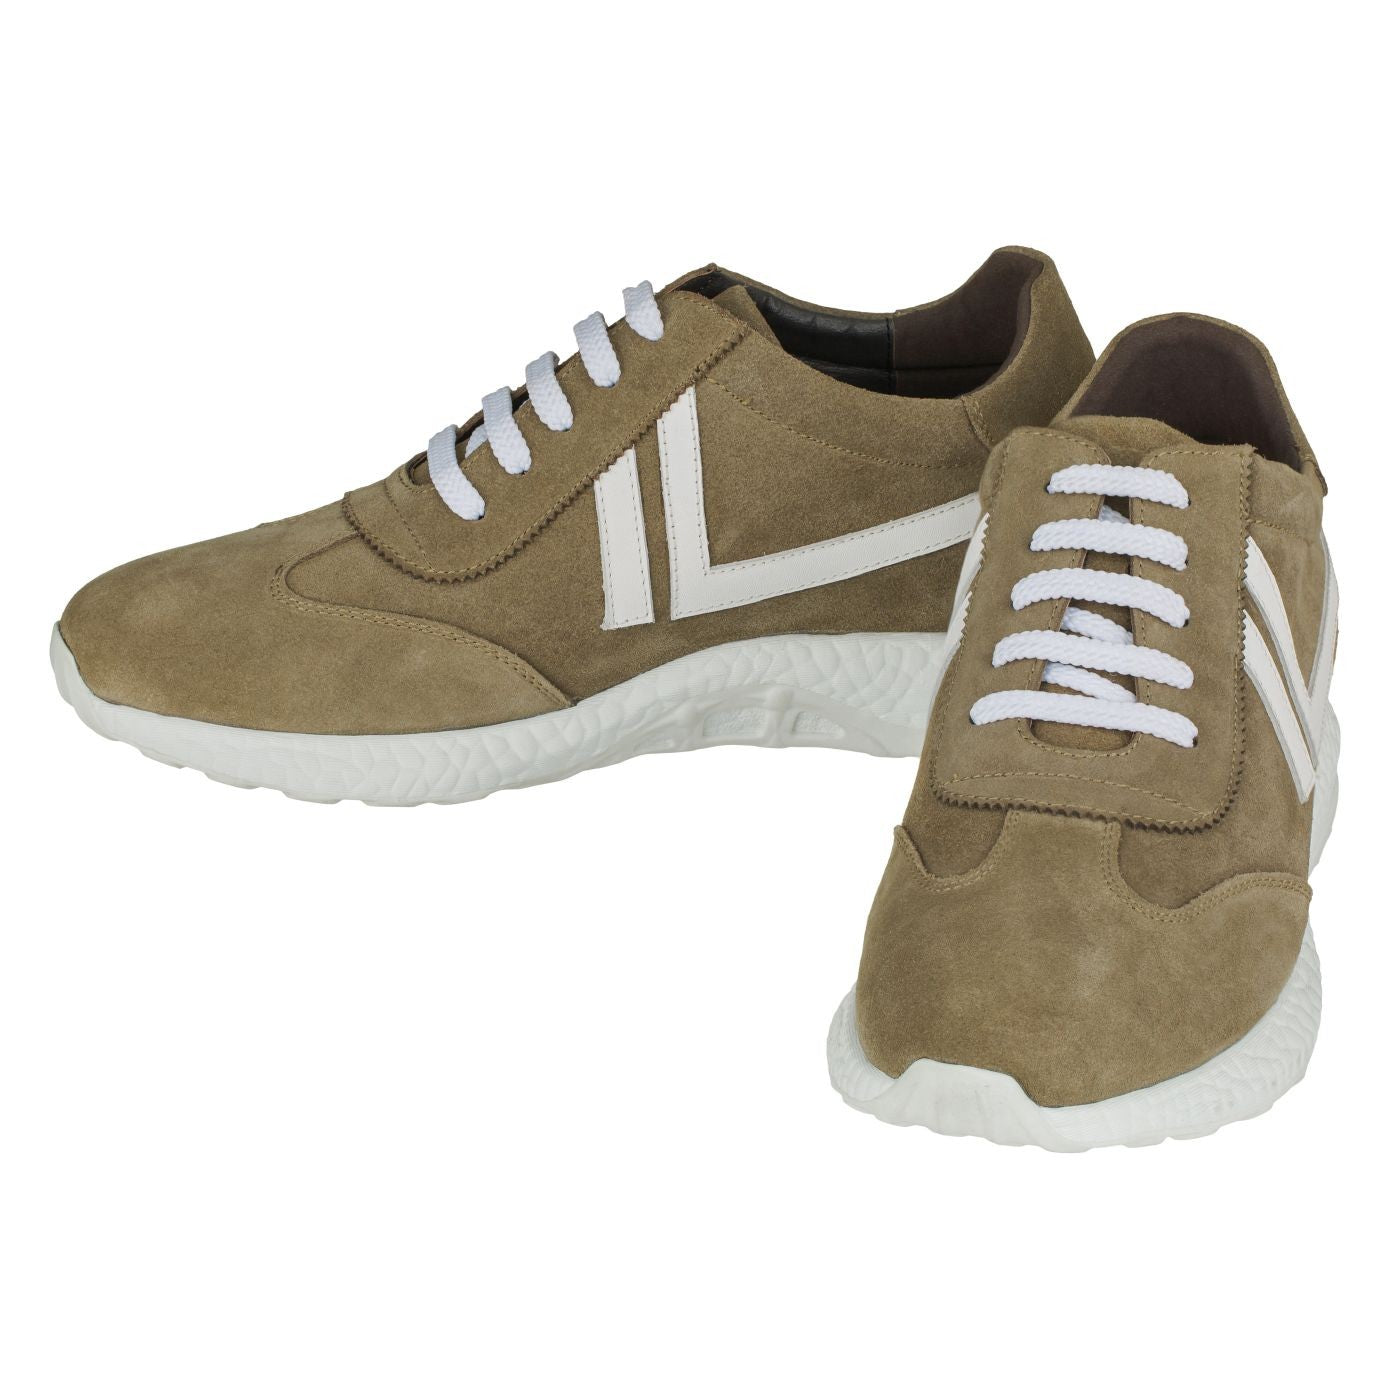 Elevator shoes height increase CALTO Khaki Men's Elevator Sneakers - 2.8 Inches - S2093